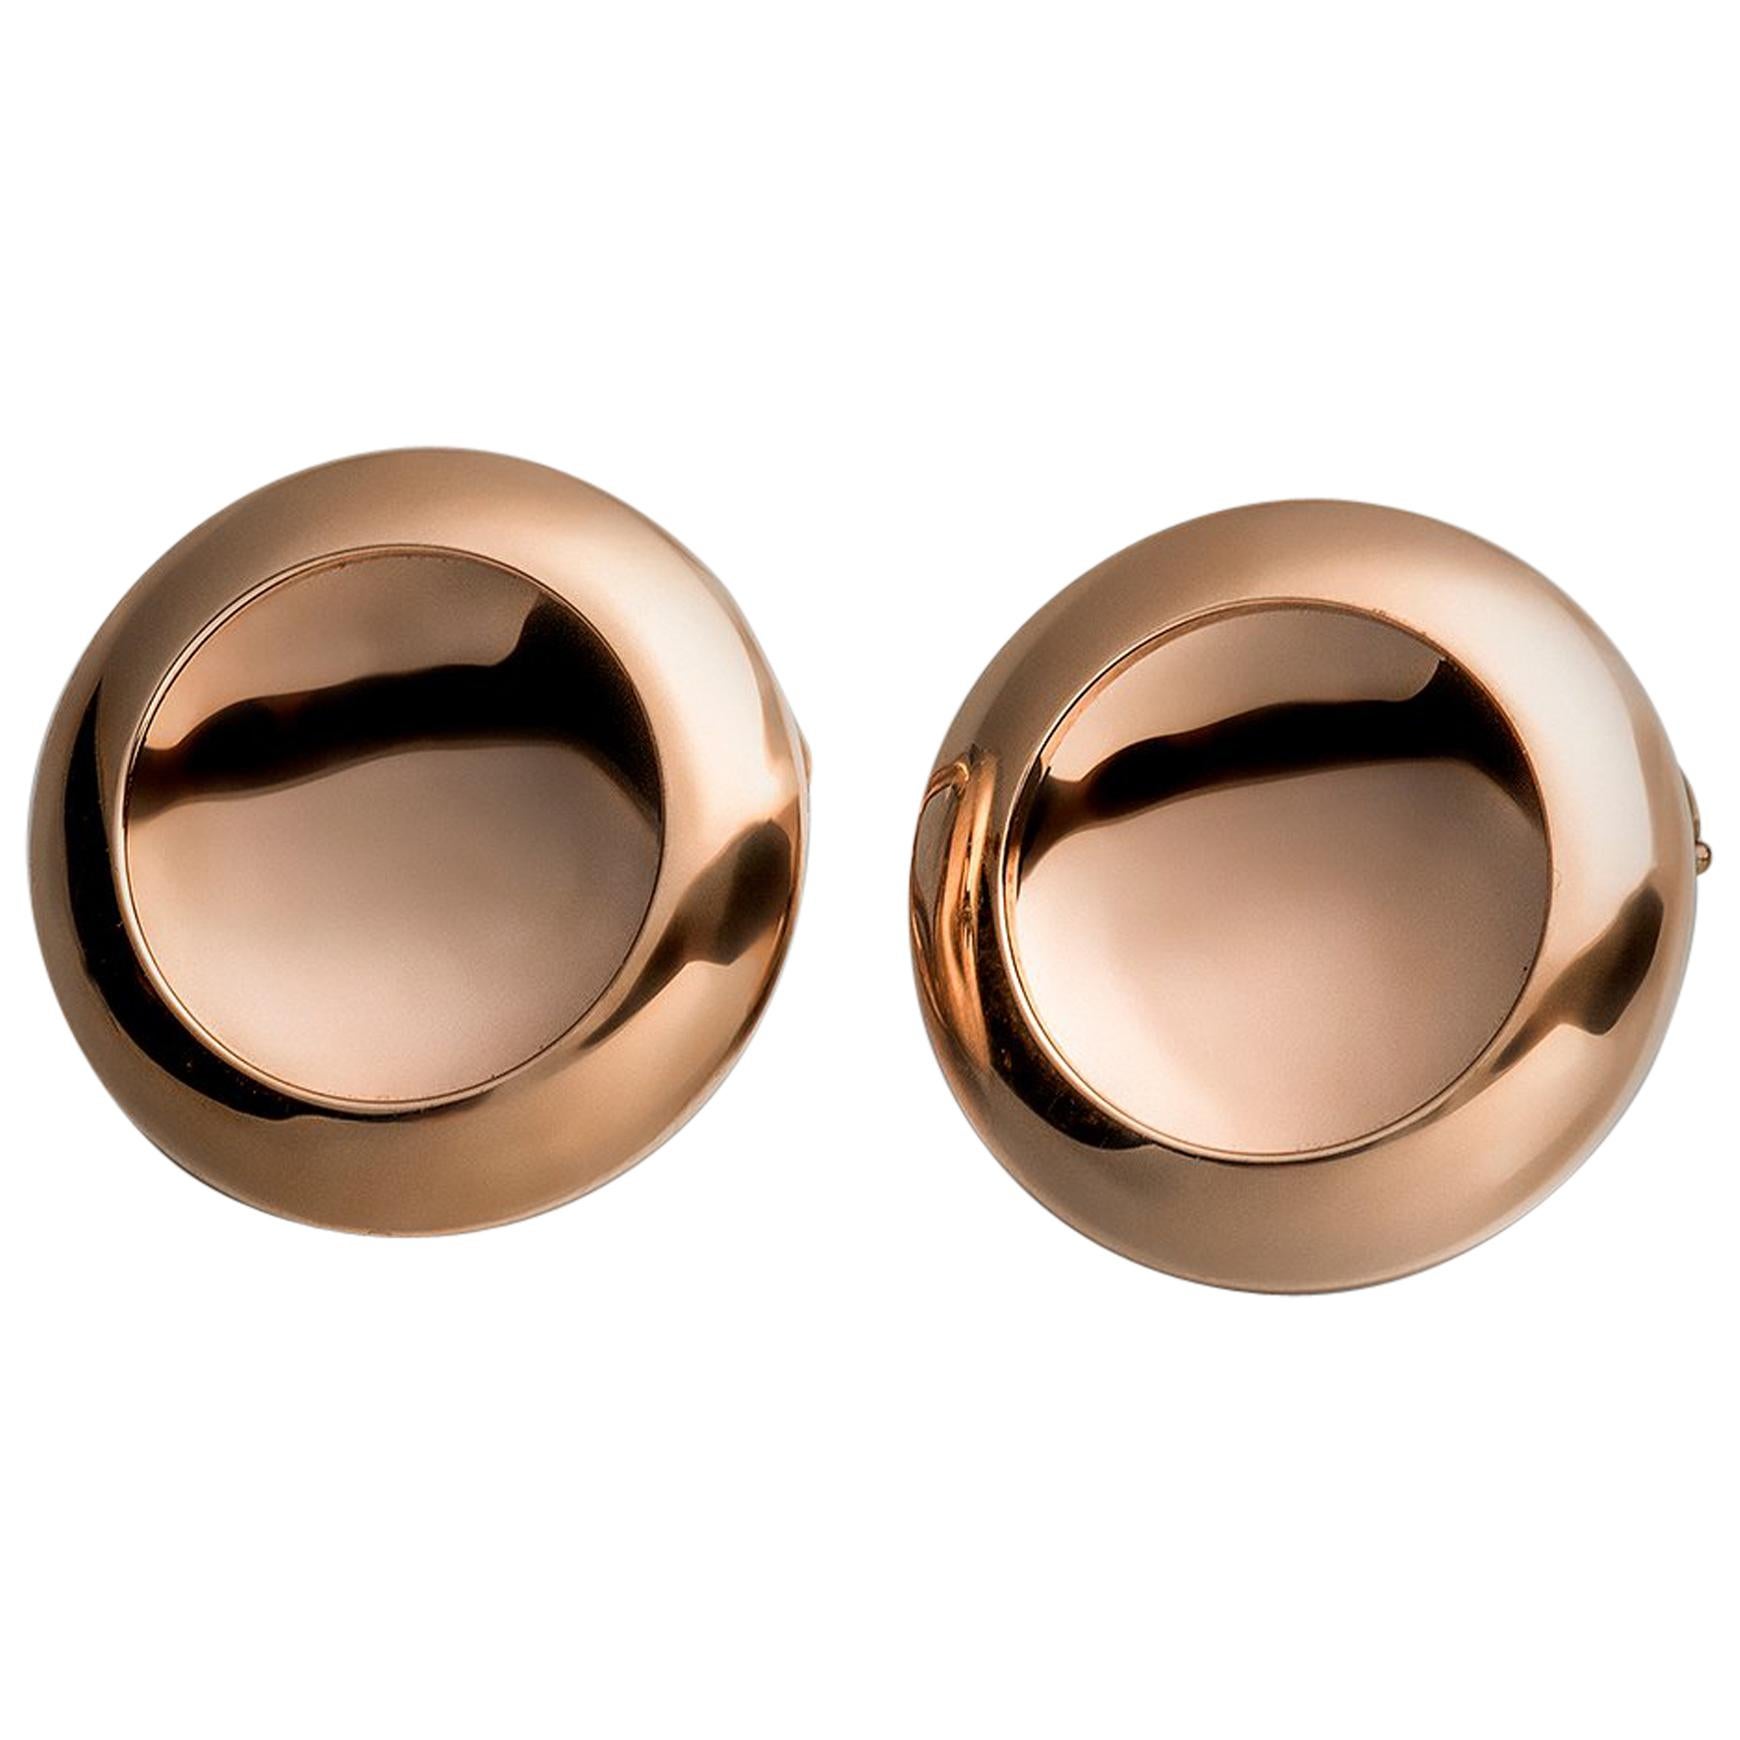 Anish Kapoor 18 Karat Rose Gold Earrings, 'Water Form I', Small, 2014 For Sale